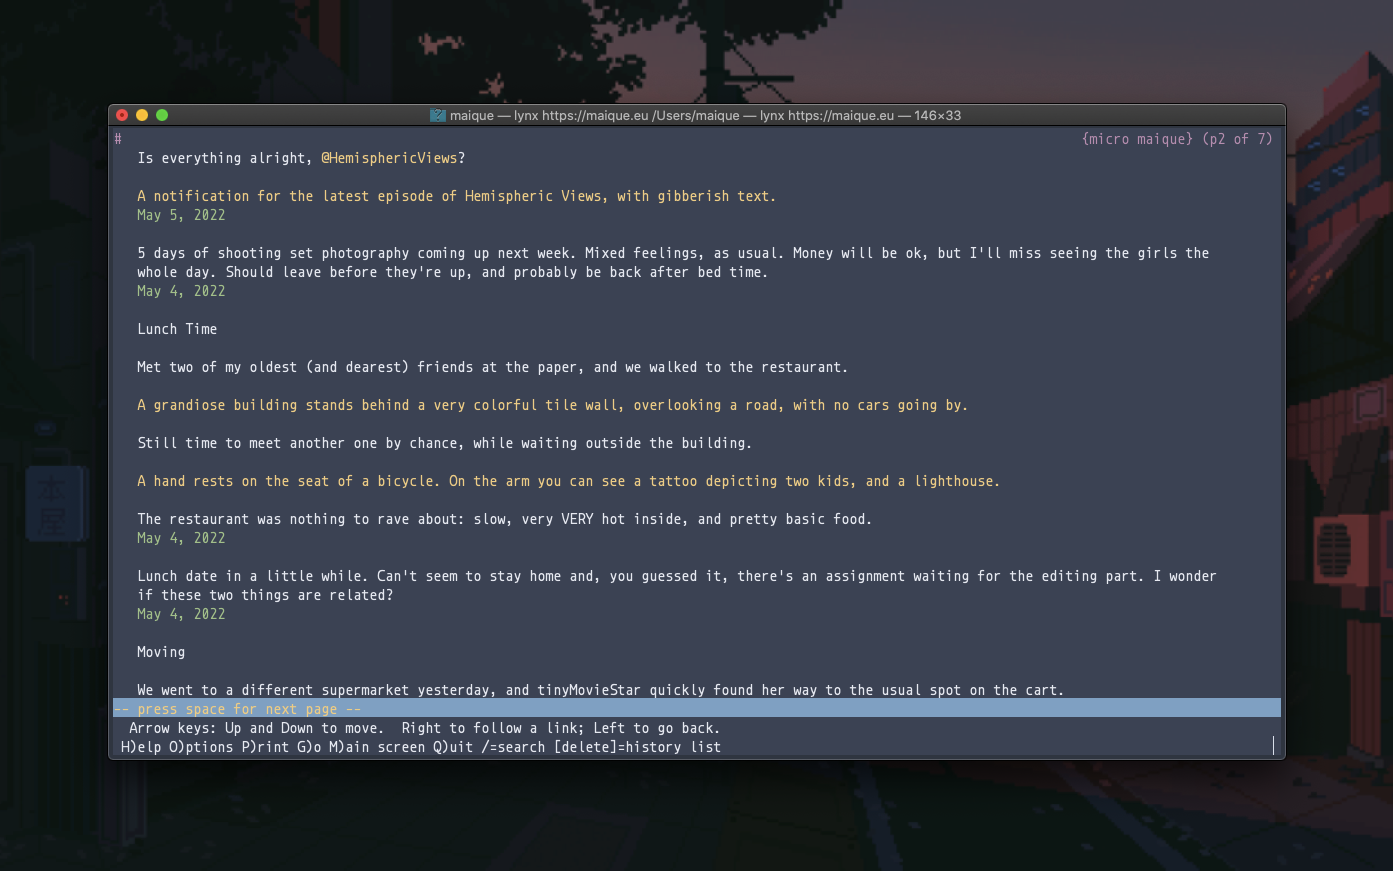 Terminal window with Lynx browser running, showing the text version of this blog. The image descriptions are working, showing in yellow.